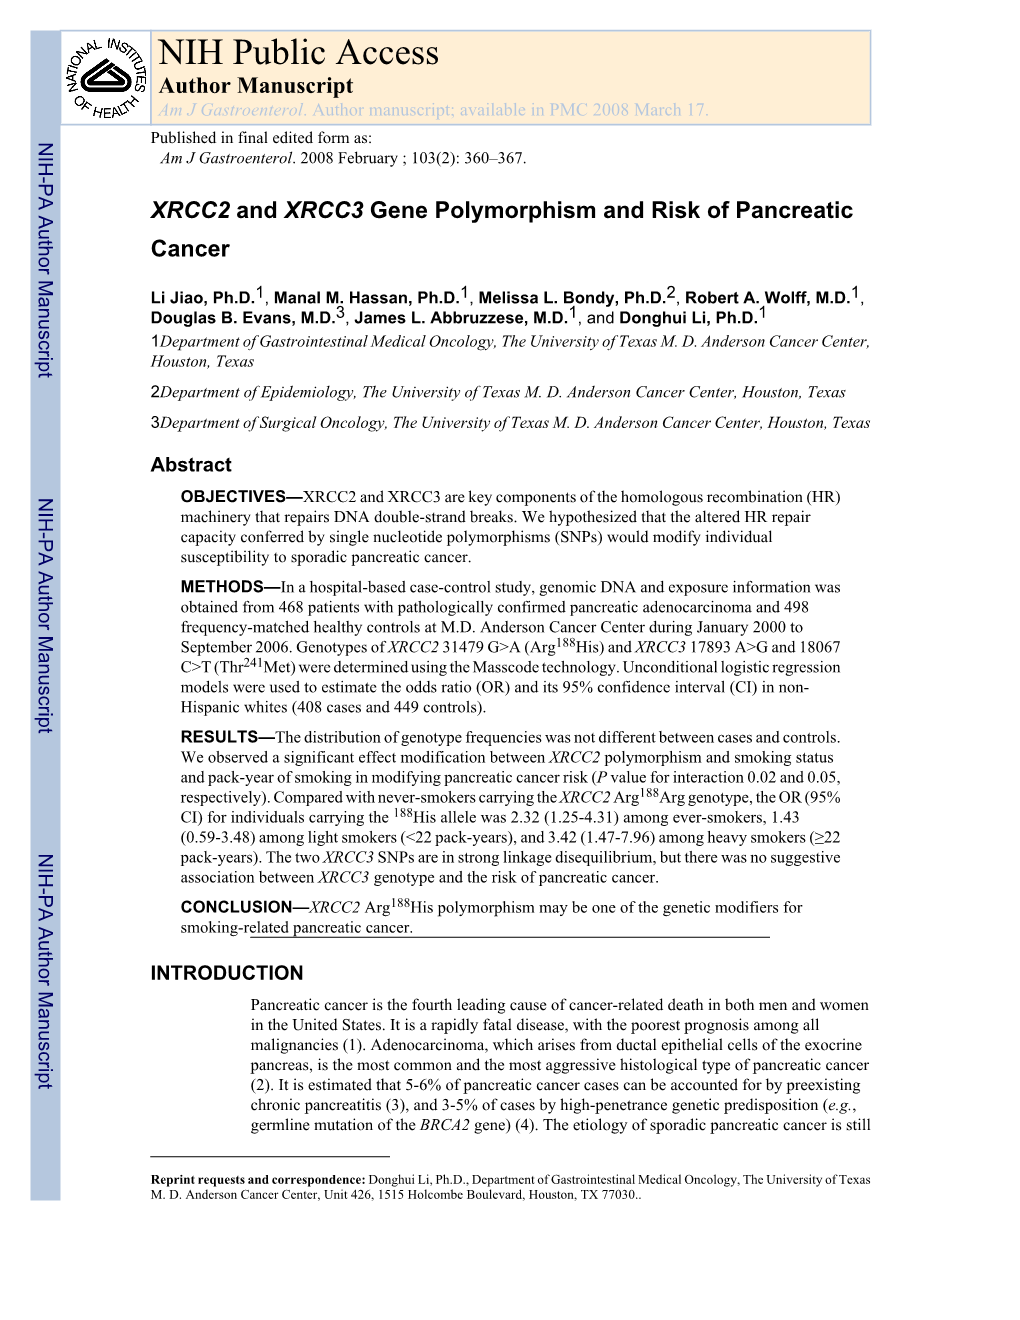 XRCC2 and XRCC3 Gene Polymorphism and Risk of Pancreatic Cancer